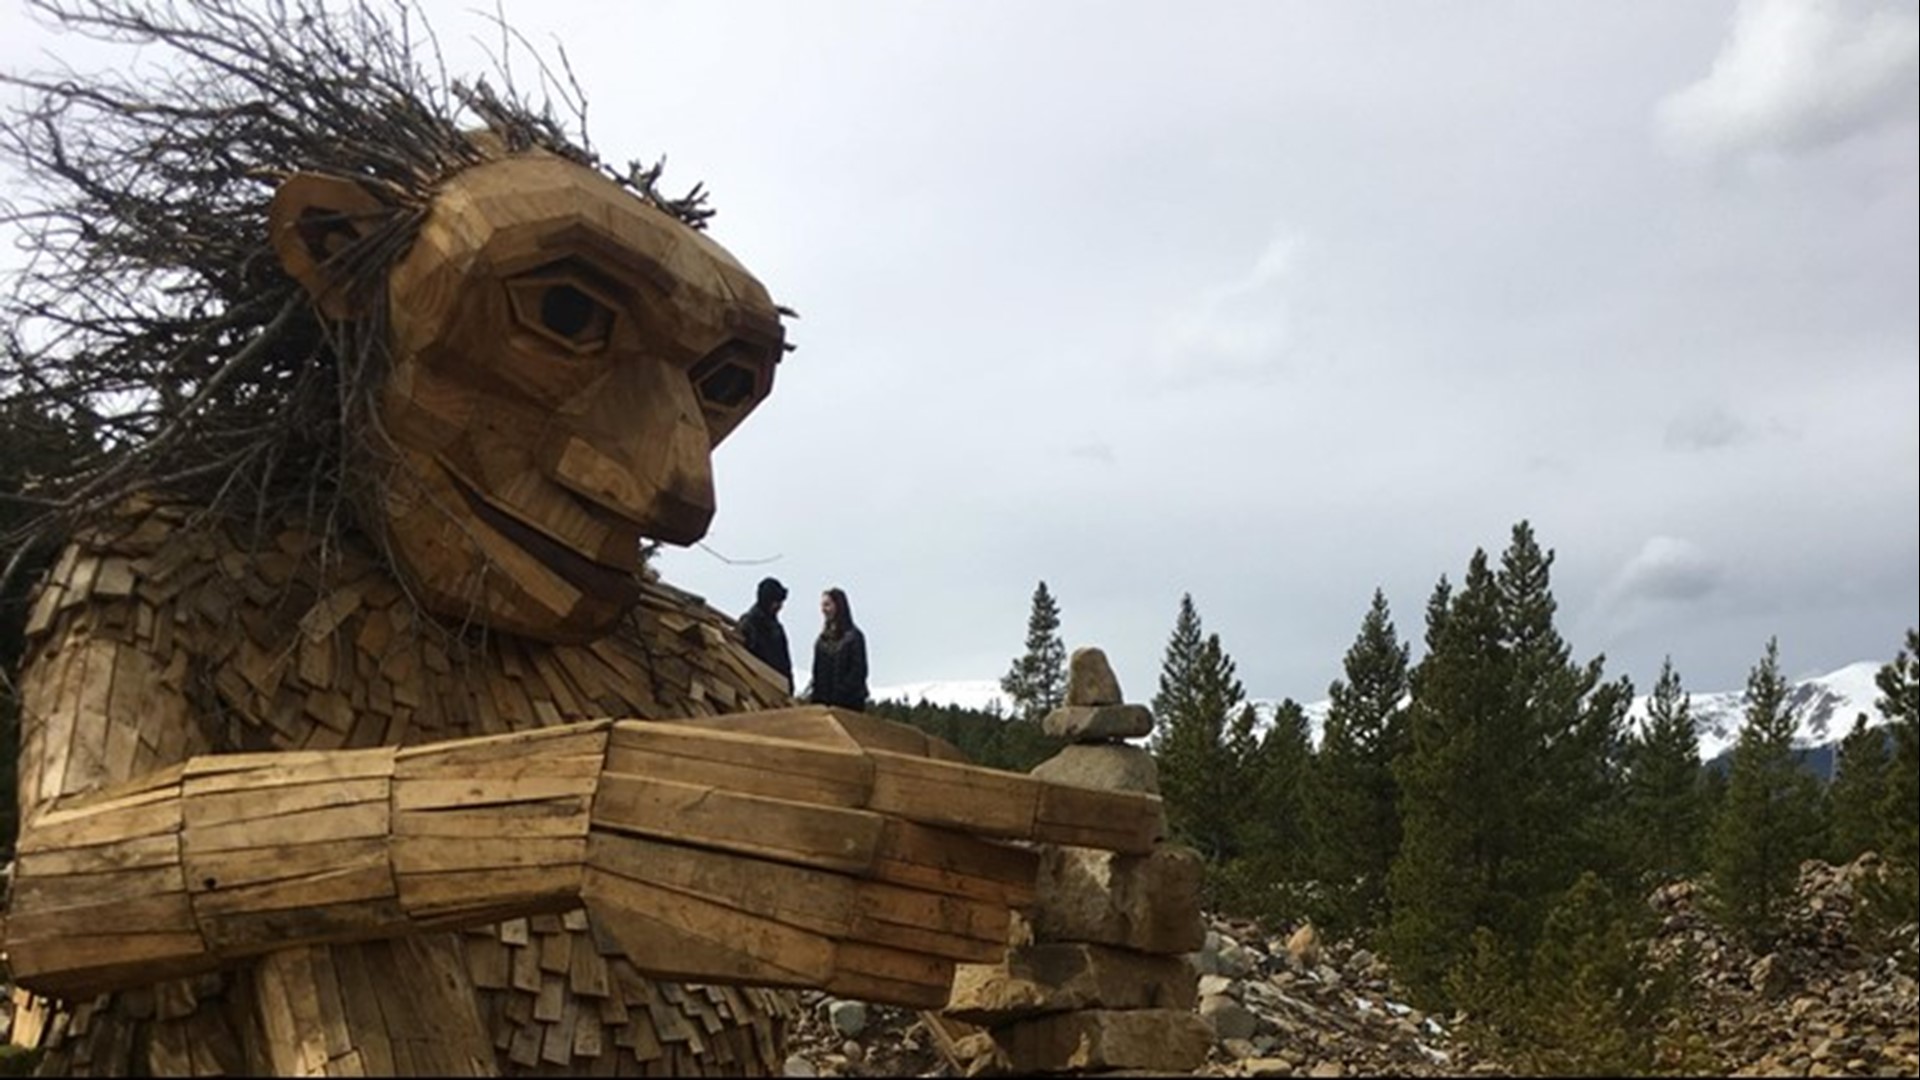 Isak Heartstone, a giant wooden troll that was installed in Breckenridge but later removed, will return in May.